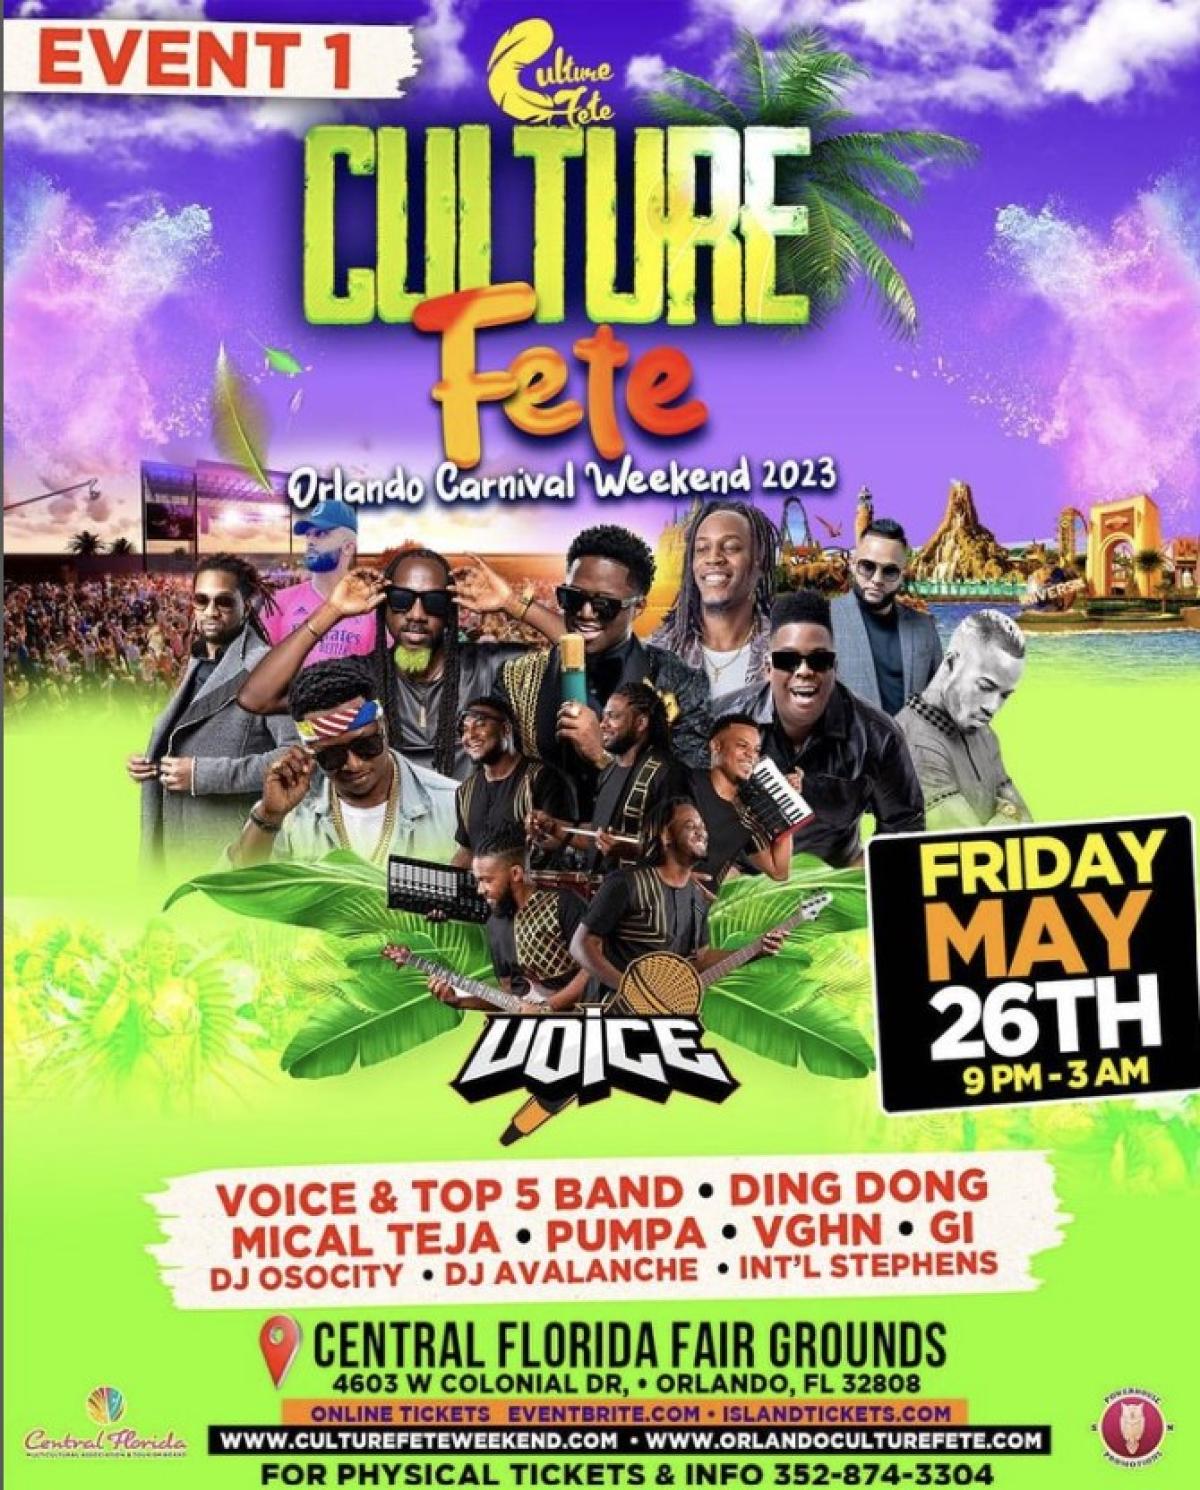 Culture Fete : All Access Pass  flyer or graphic.